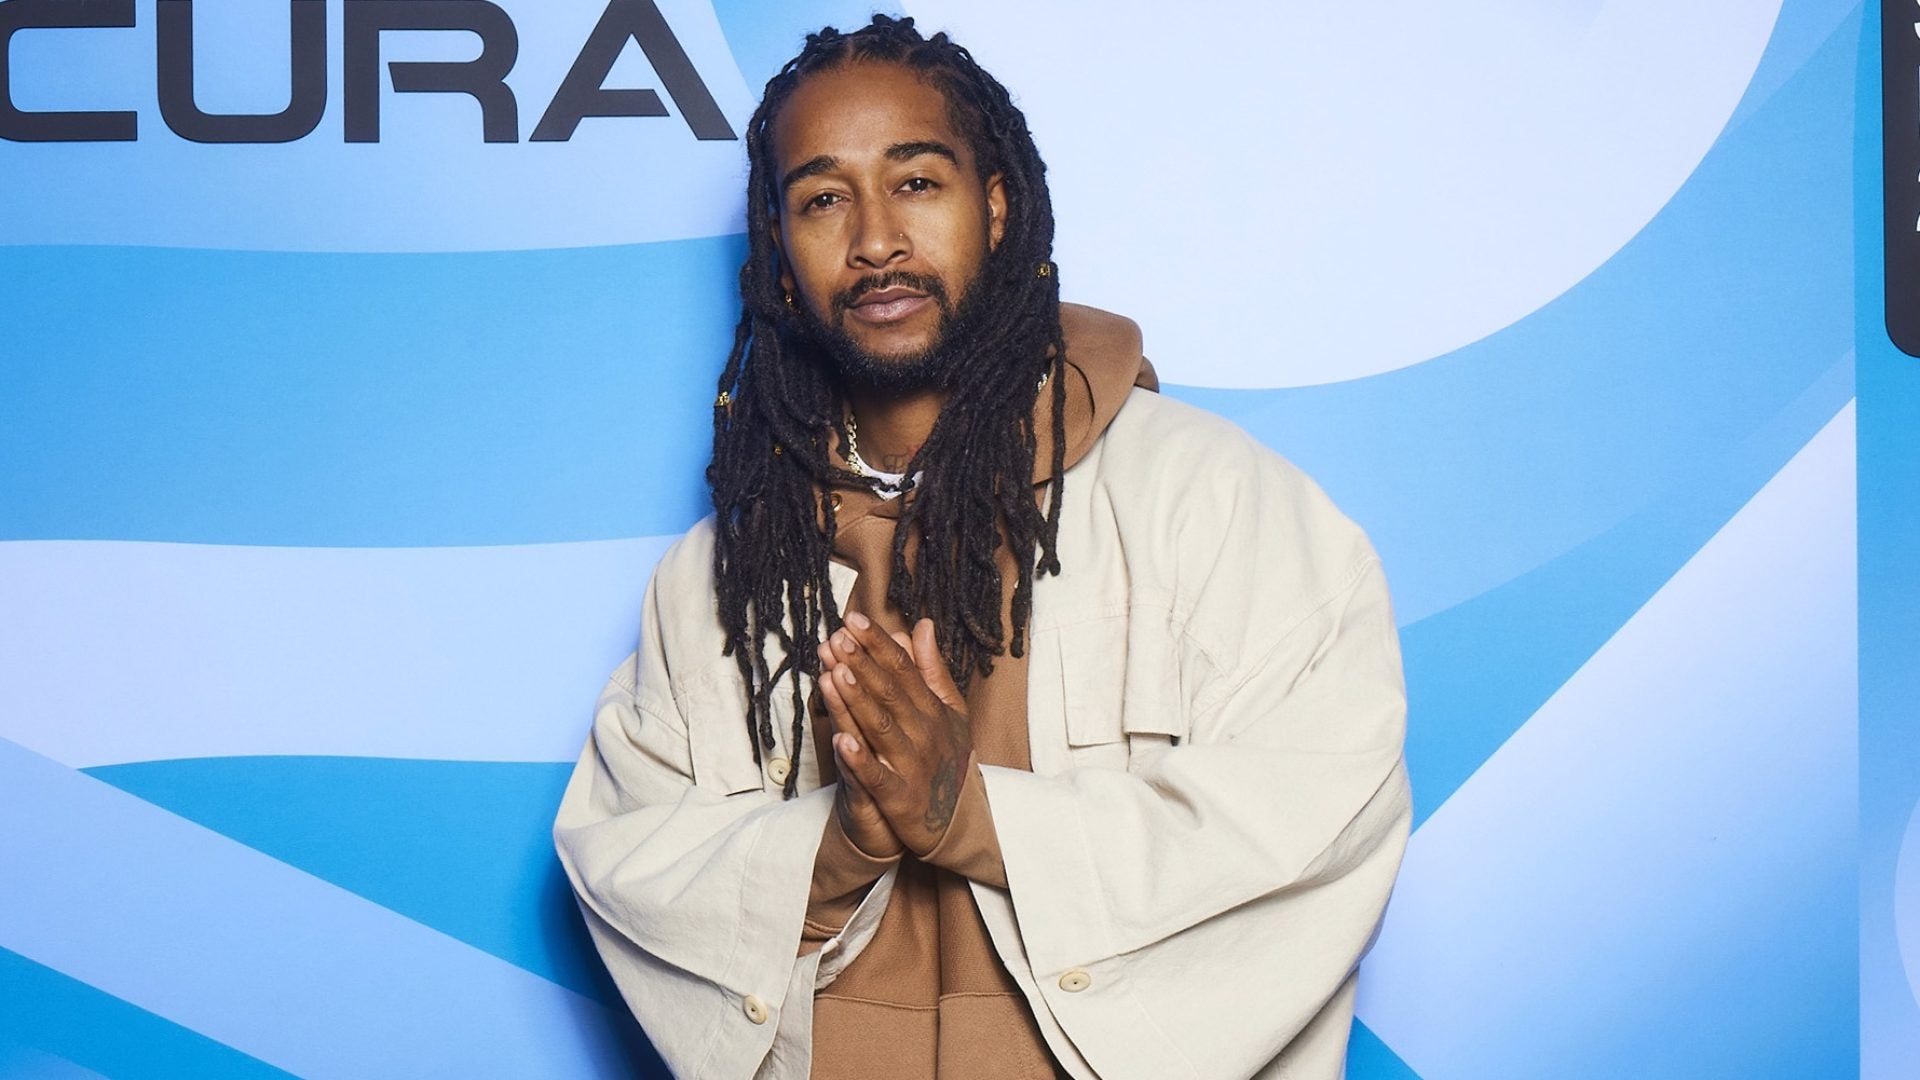 Omarion Meets Taye Diggs For The First Time: ‘He Seems Like A Cool Dude'